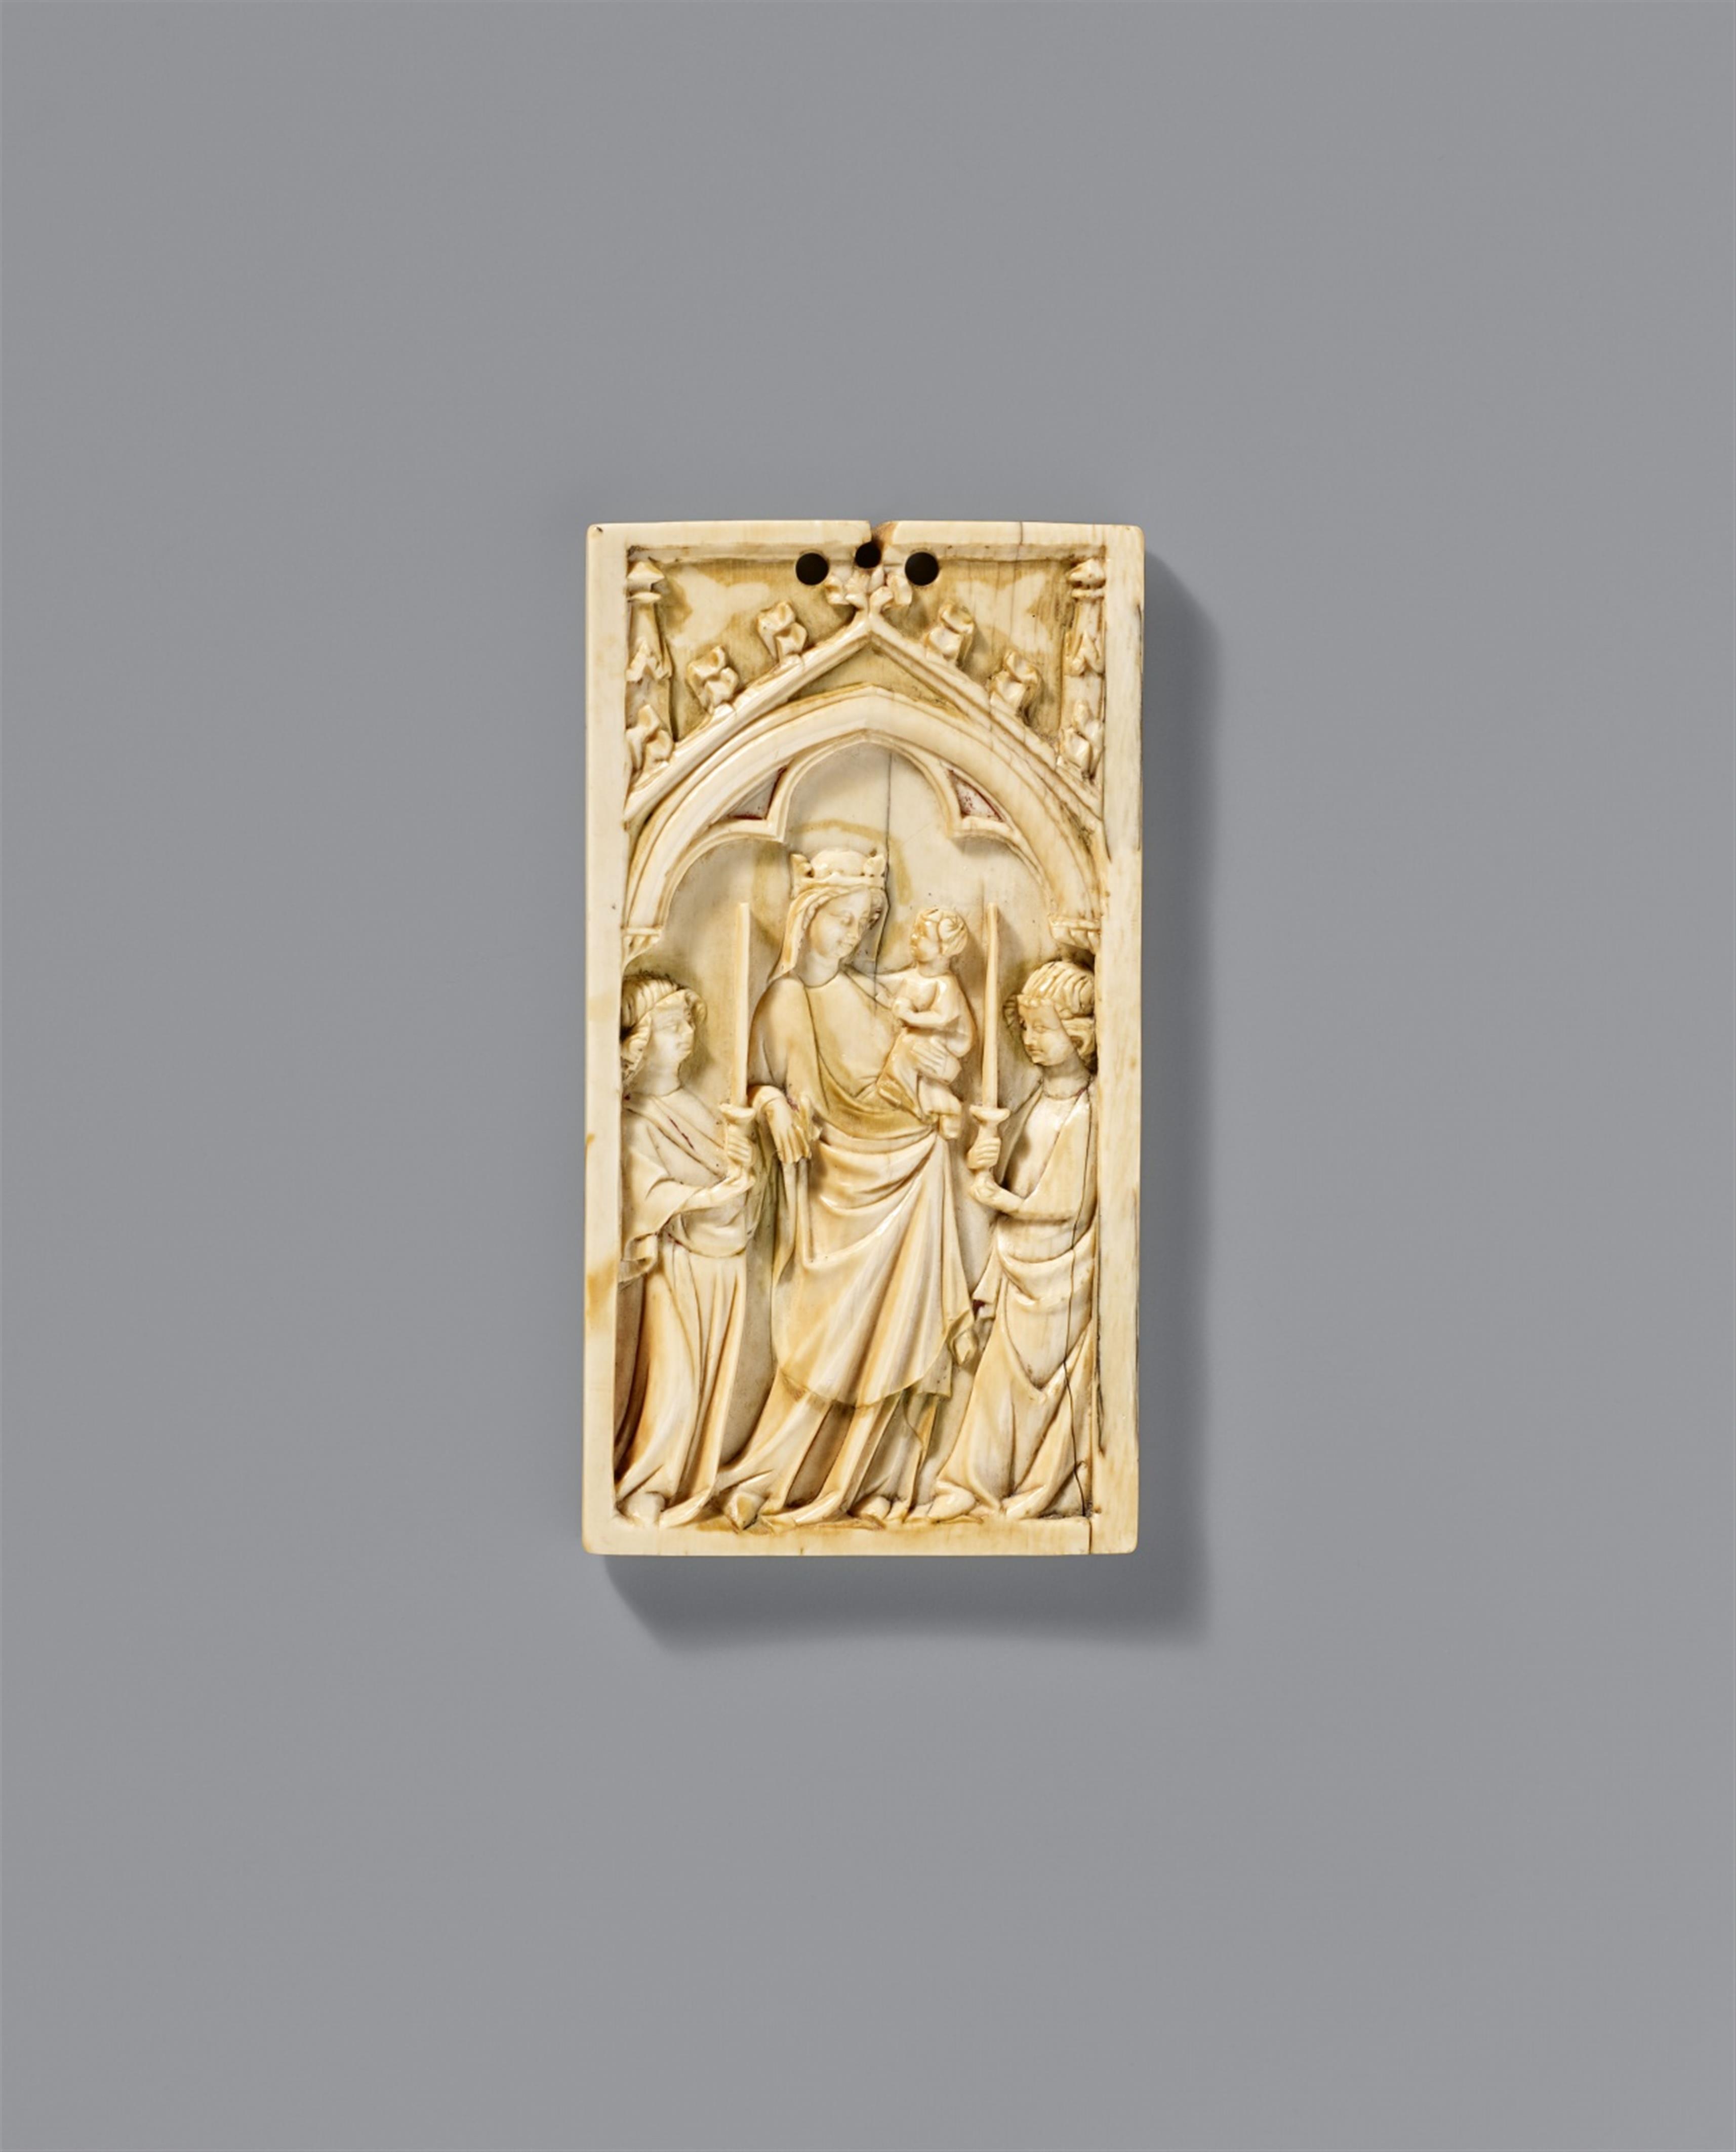 Northern France, 14th century - A 14th century Northern French carved ivory relief of the Virgin with Child - image-1